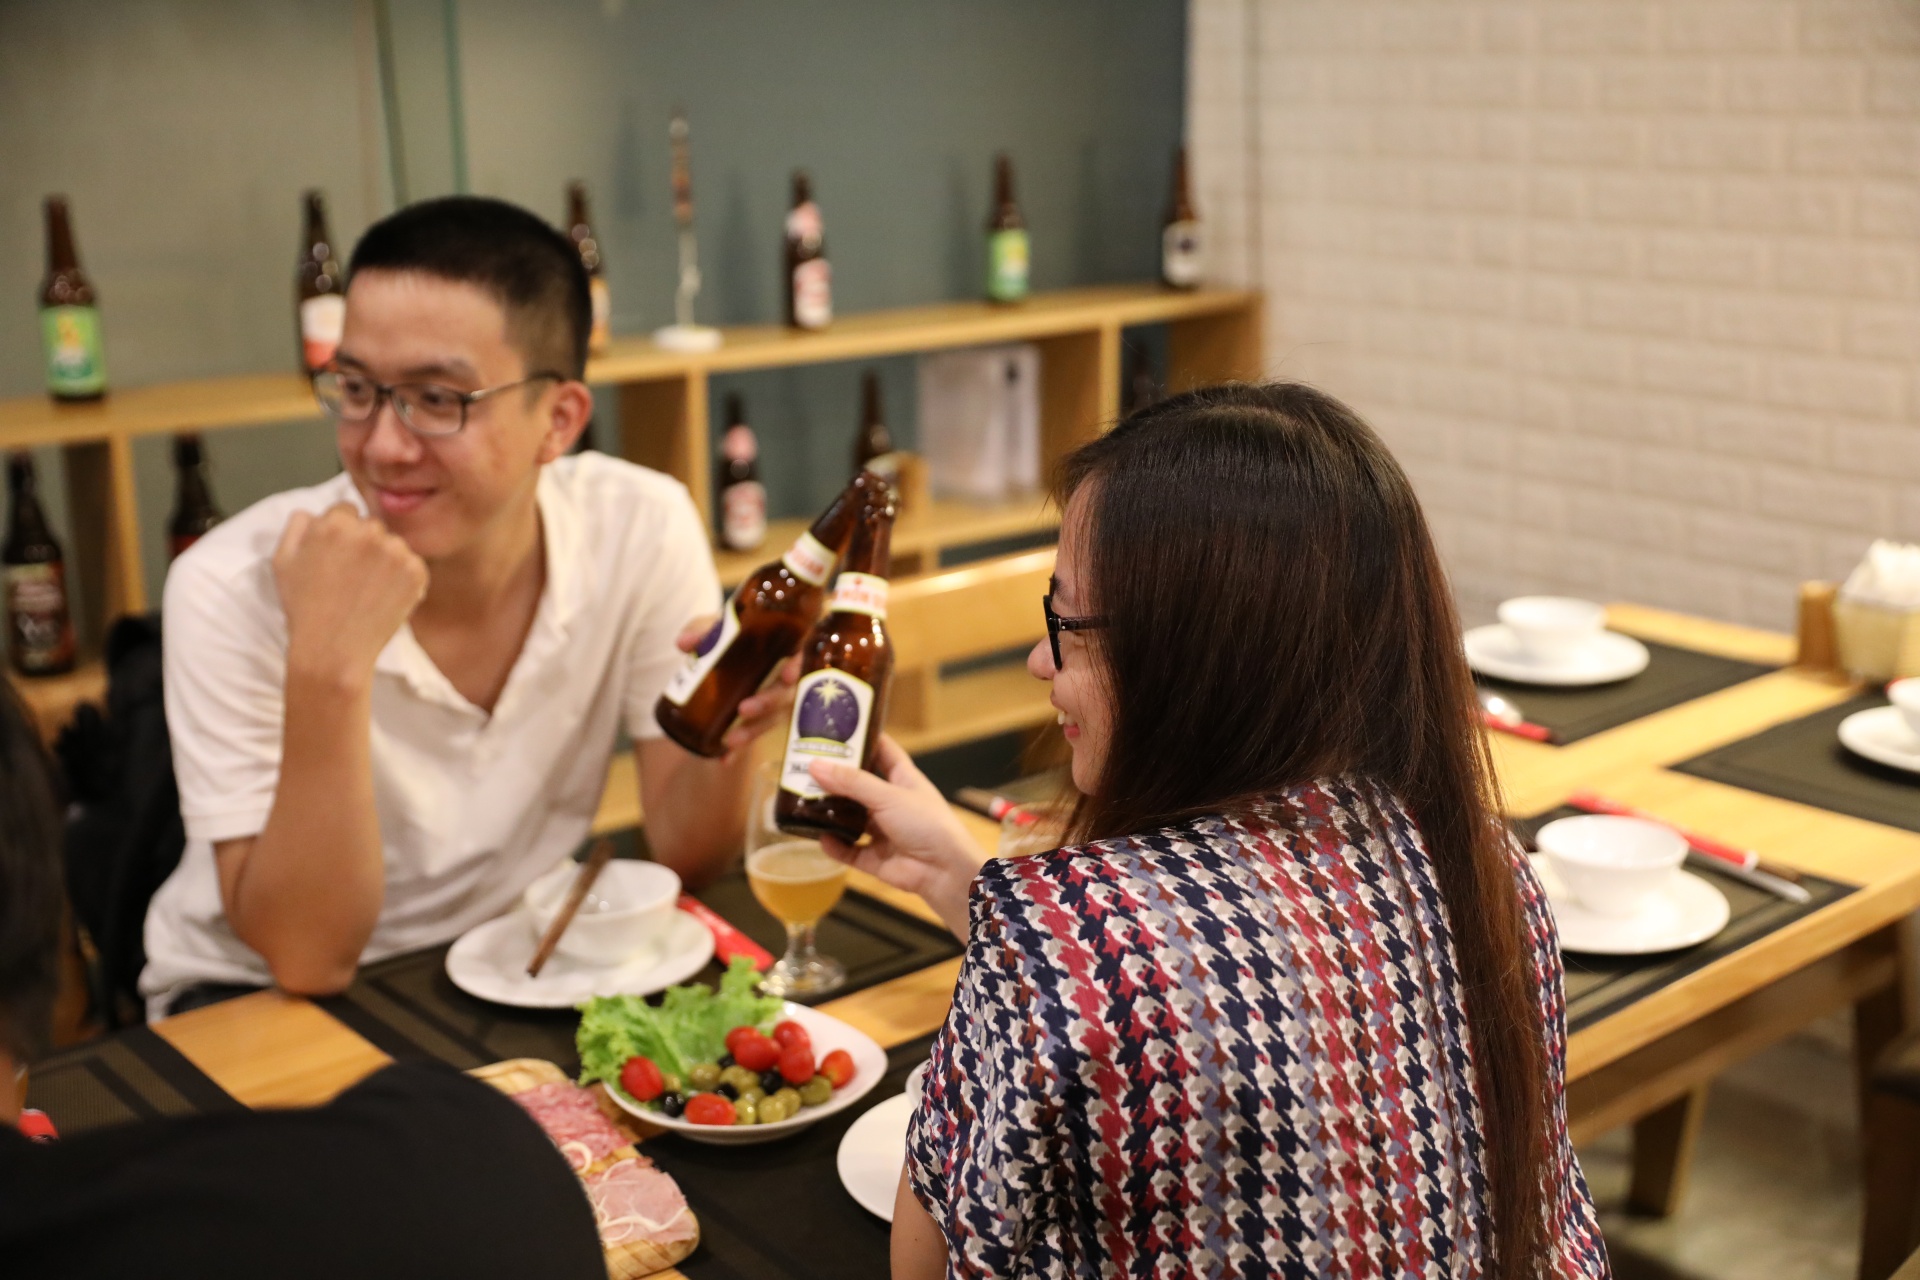 Is non-alcoholic beer now a priority at Tet?